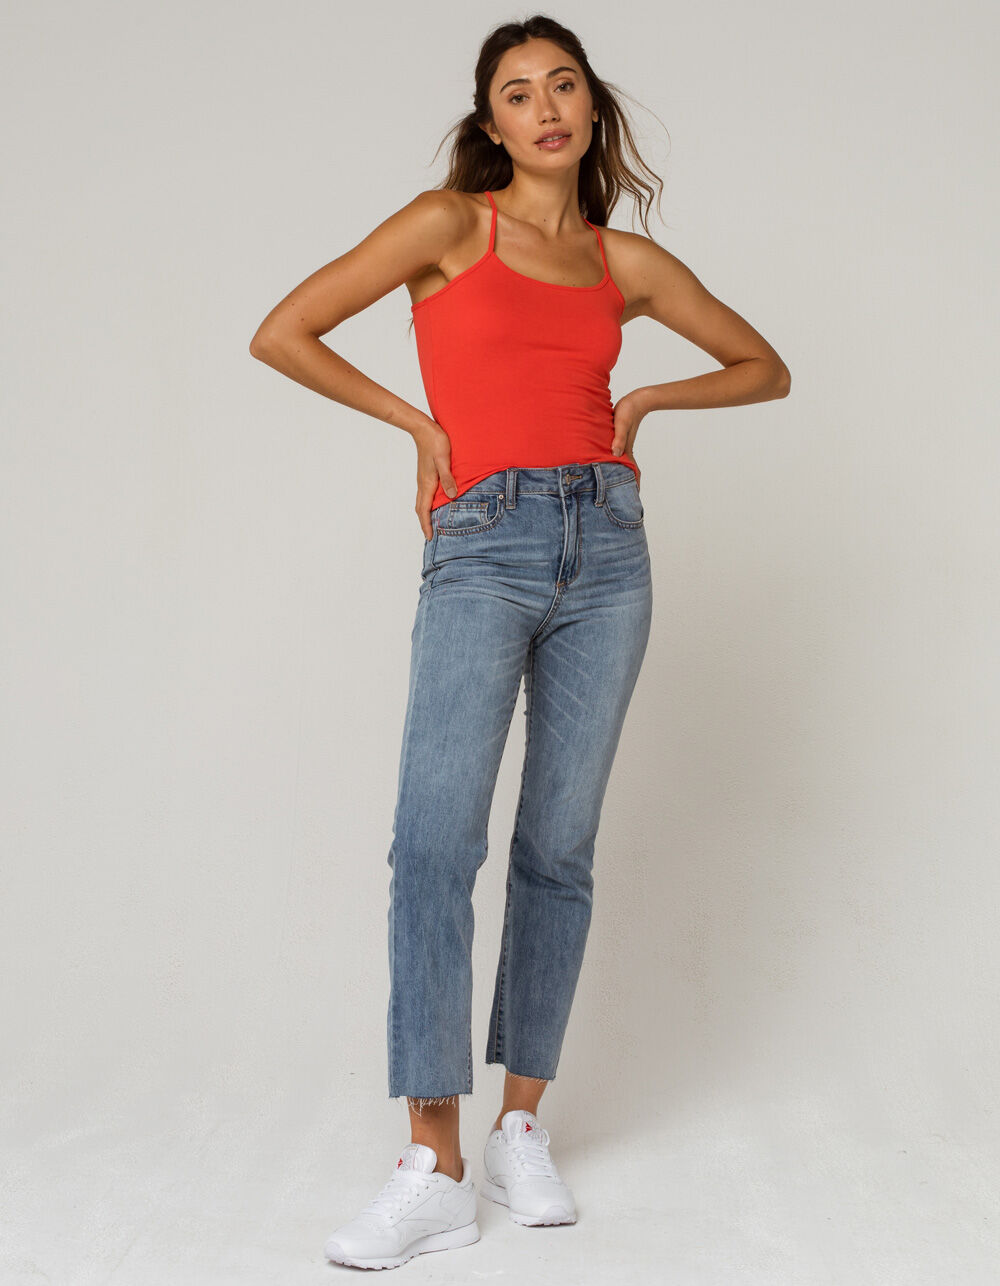 HEART & HIPS Racerback Womens Red Cami - RED | Tillys